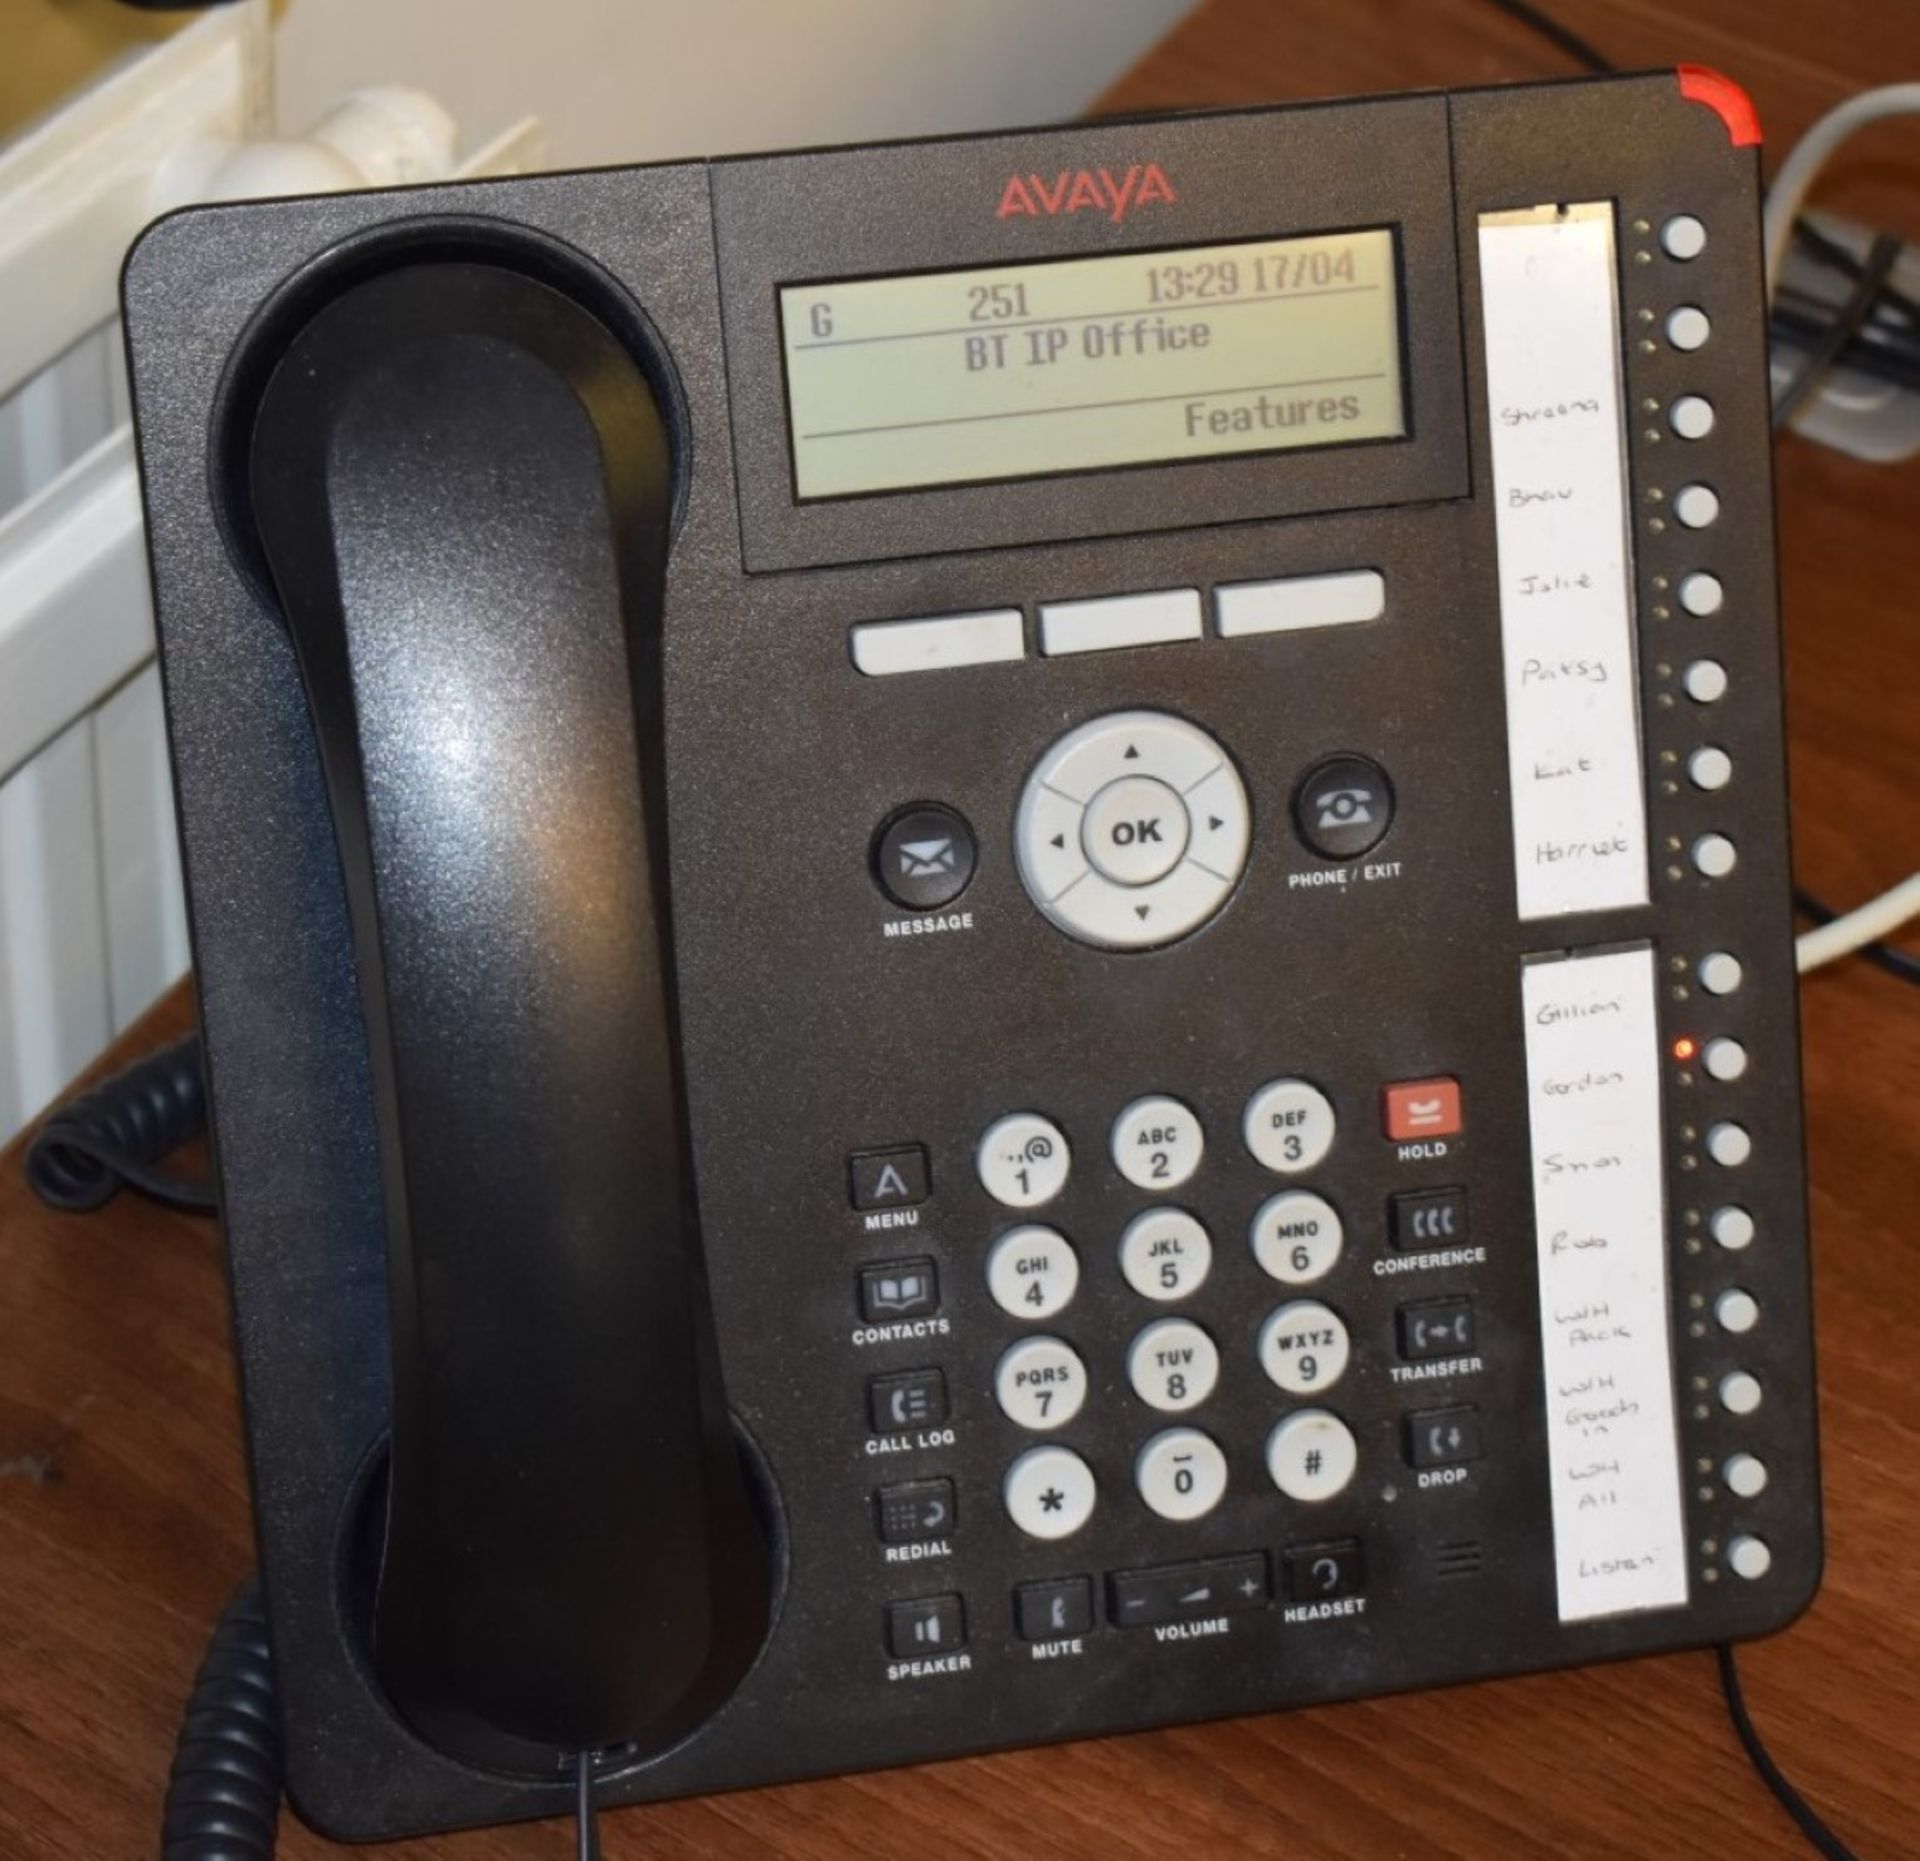 1 x Avaya IP500 V2 IP IP VOID Business Telephone System With 4 x Combi Cards and 9 x Phone Handsets - Image 7 of 15